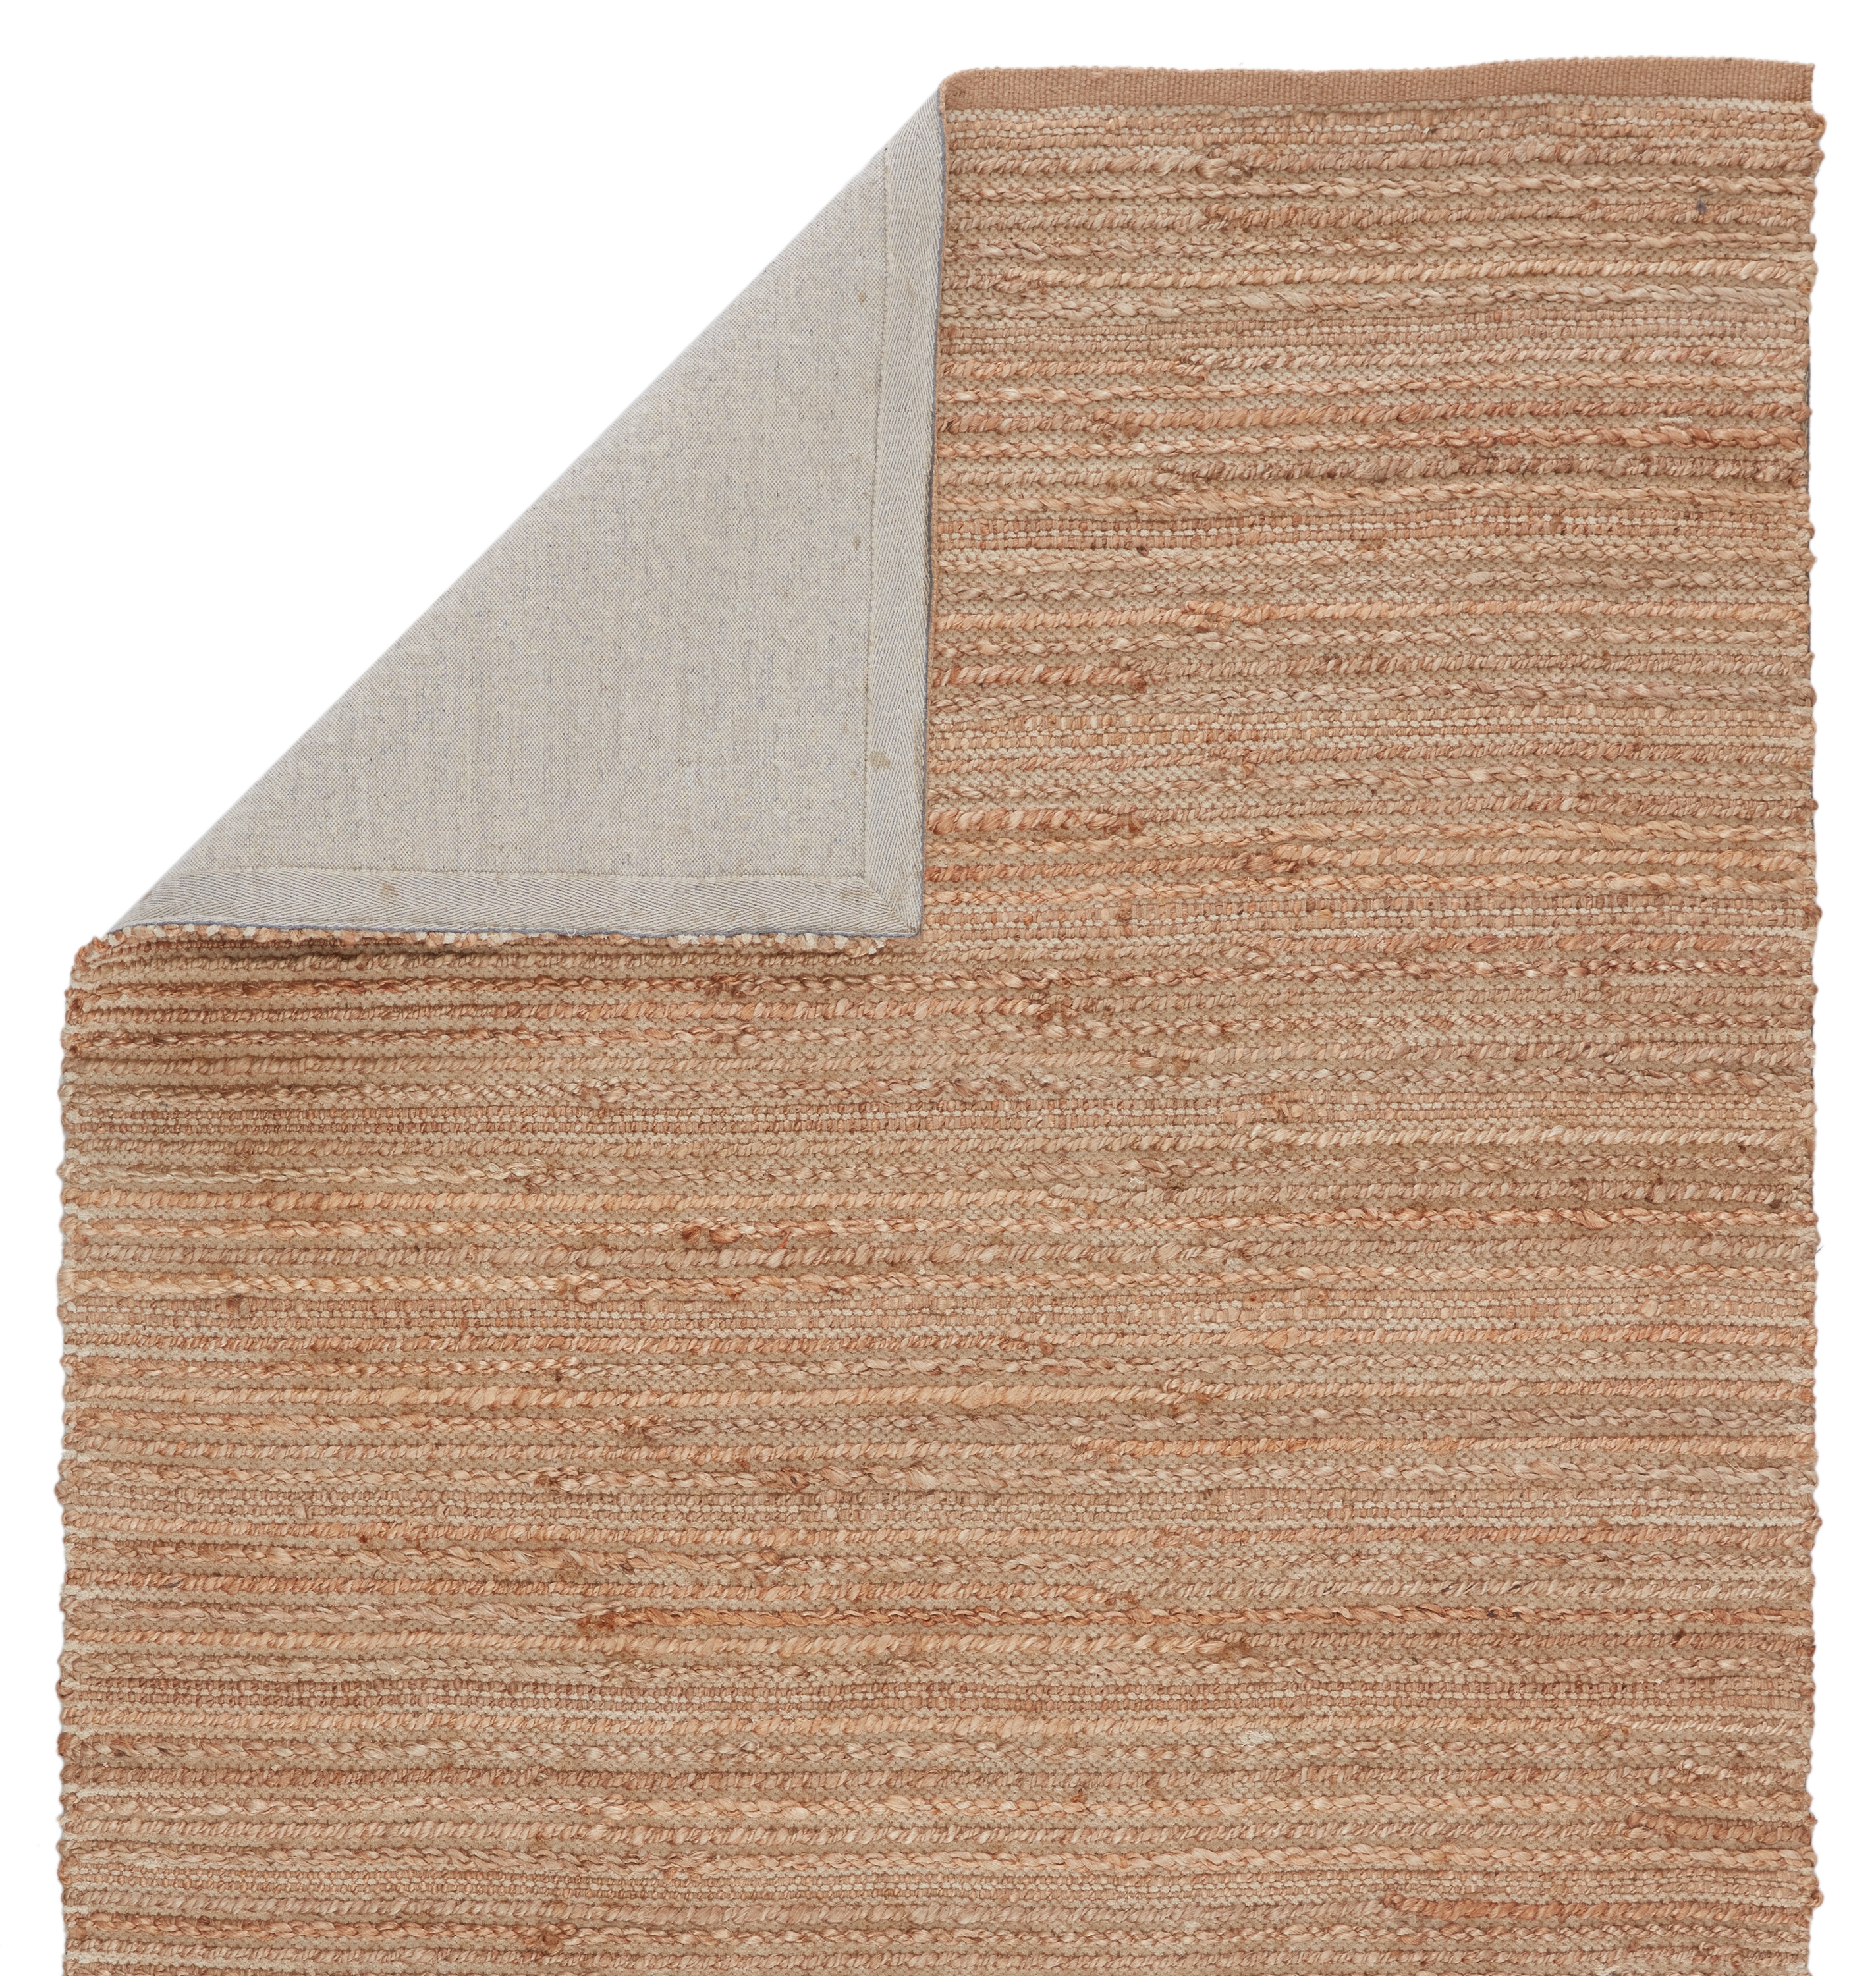 Clifton Natural Solid Tan/ White Area Rug (8' X 10') - Image 2